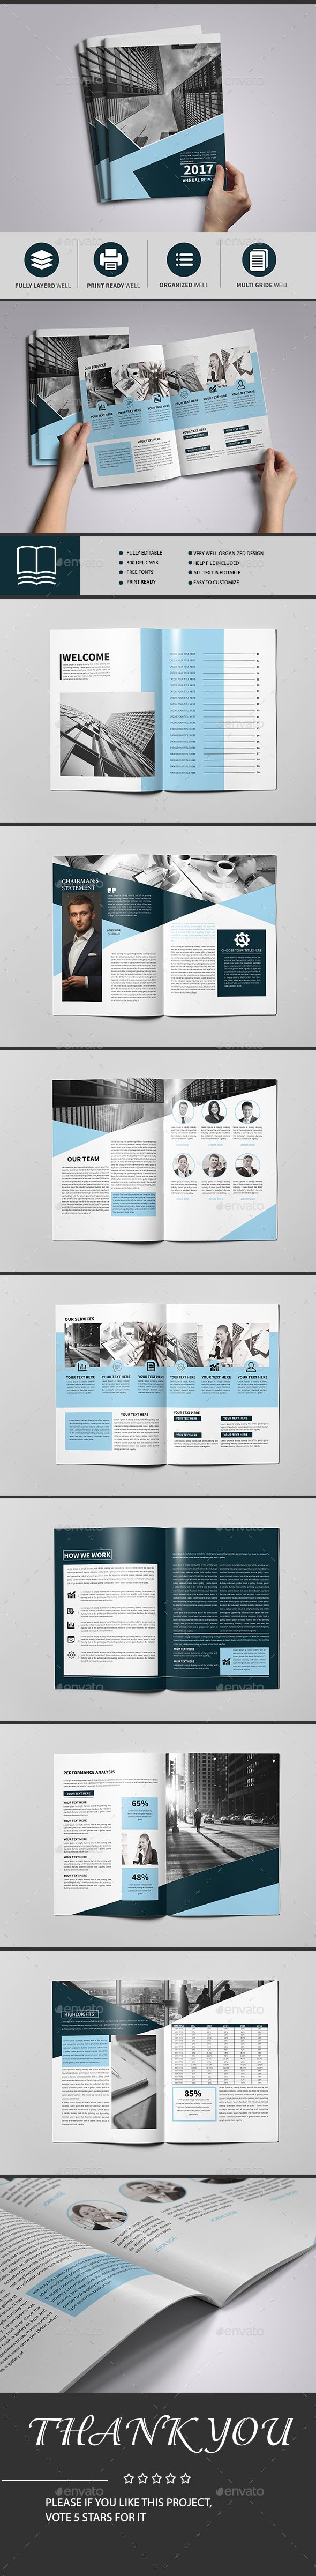 Annual Report Brochure 16 Page — Indesign Template #print Regarding Chairman's Annual Report Template